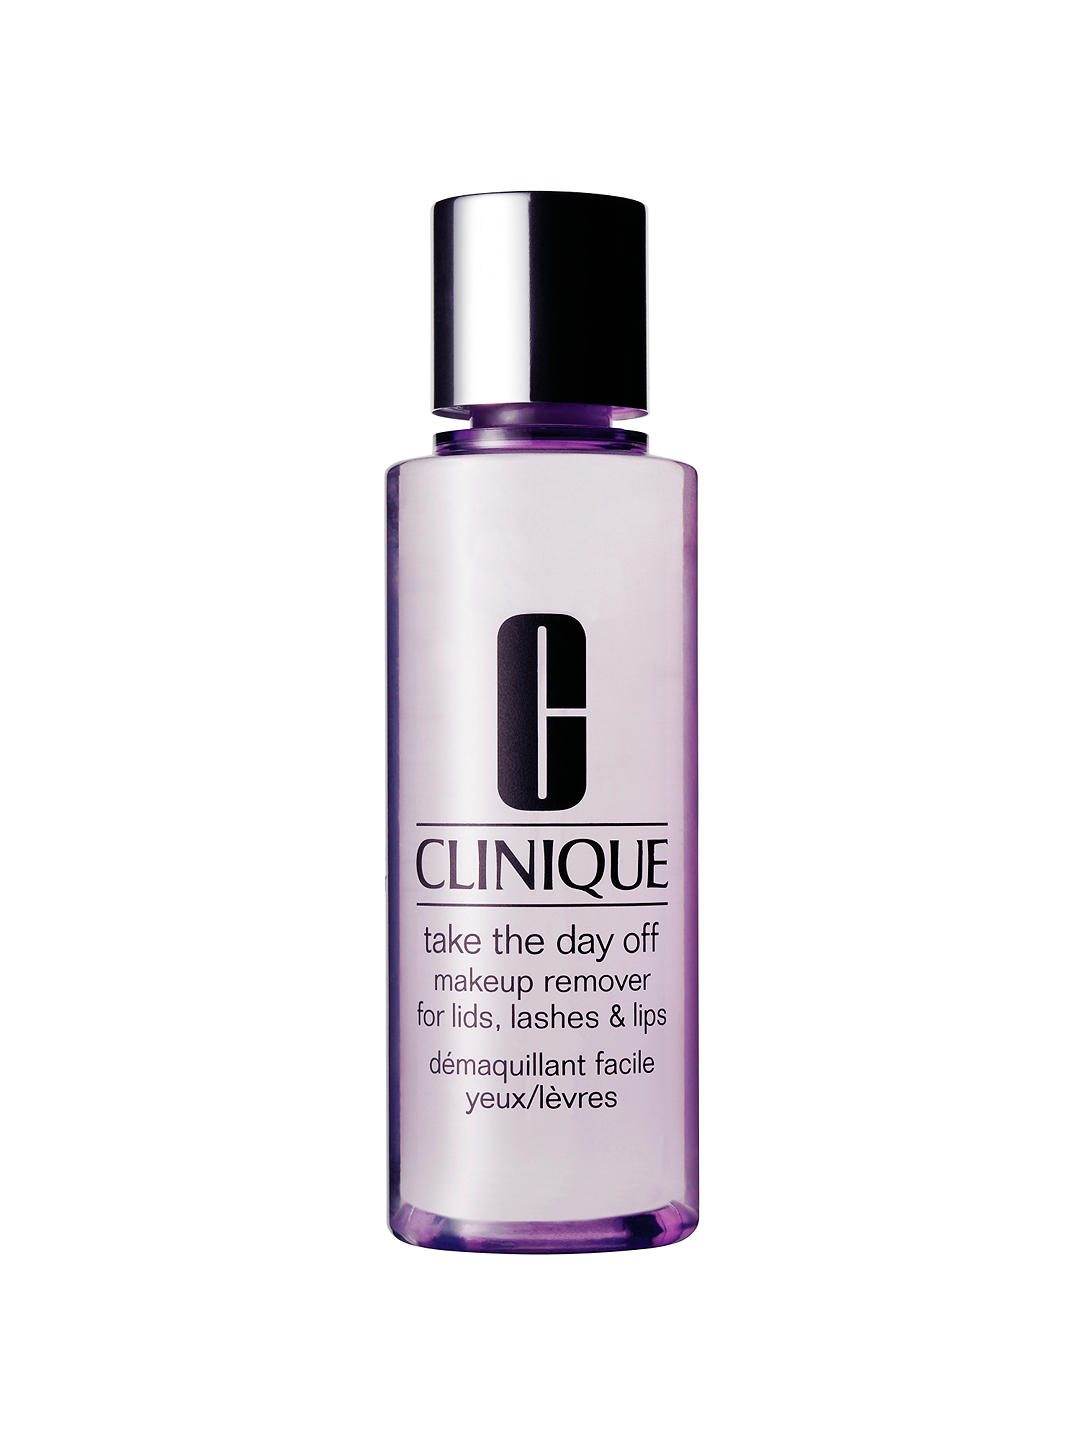 Clinique Take The Day Off Makeup Remover For Lids, Lashes & Lips - All Skin Types, 125ml 1